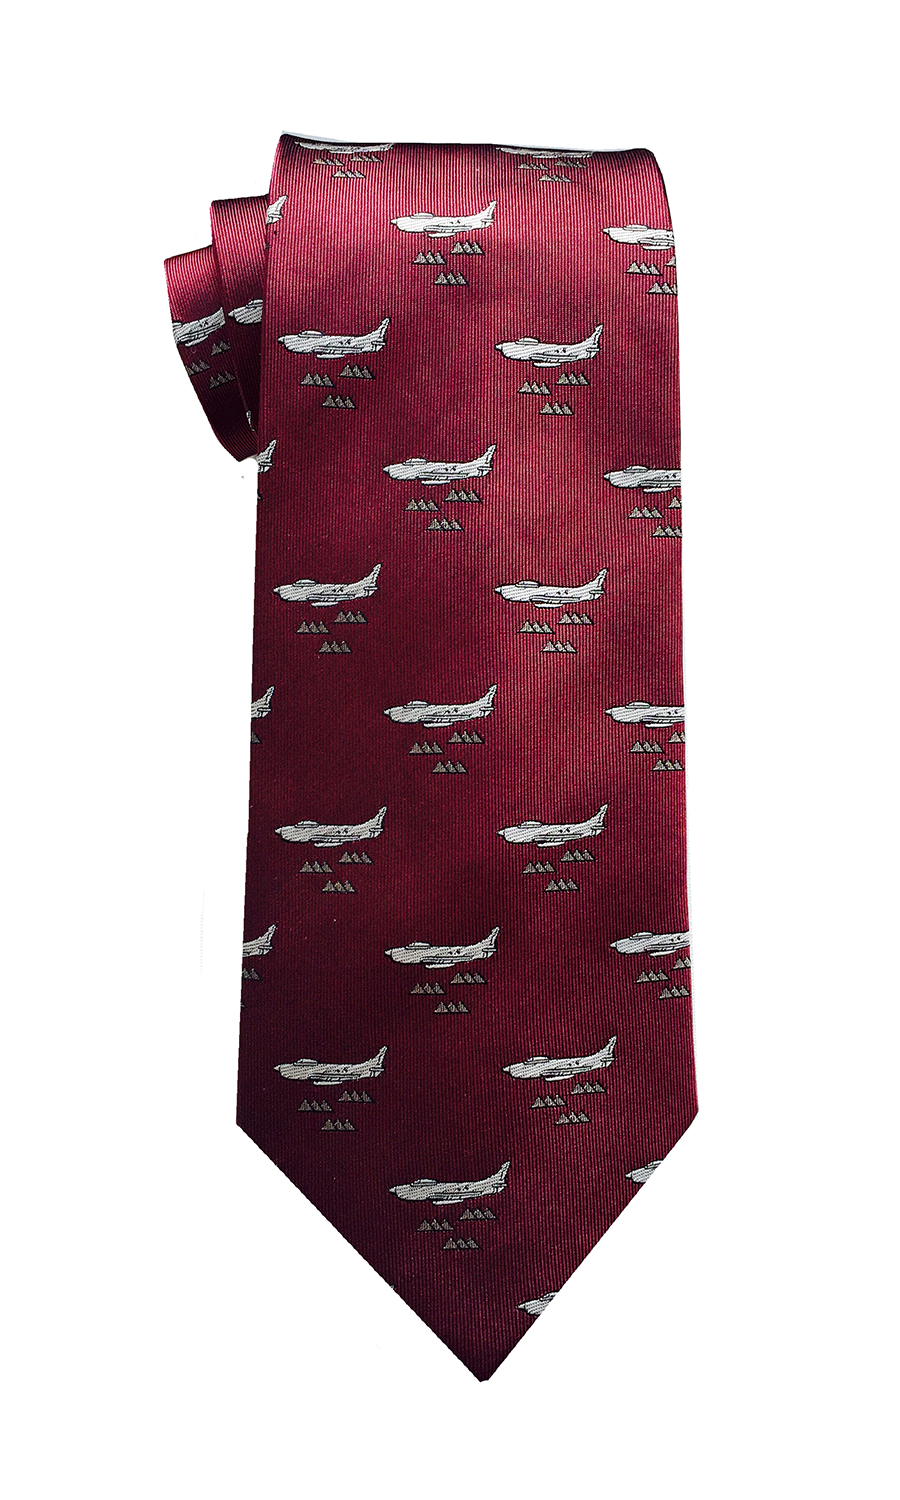 F-86 Sabre airplane tie in plum red